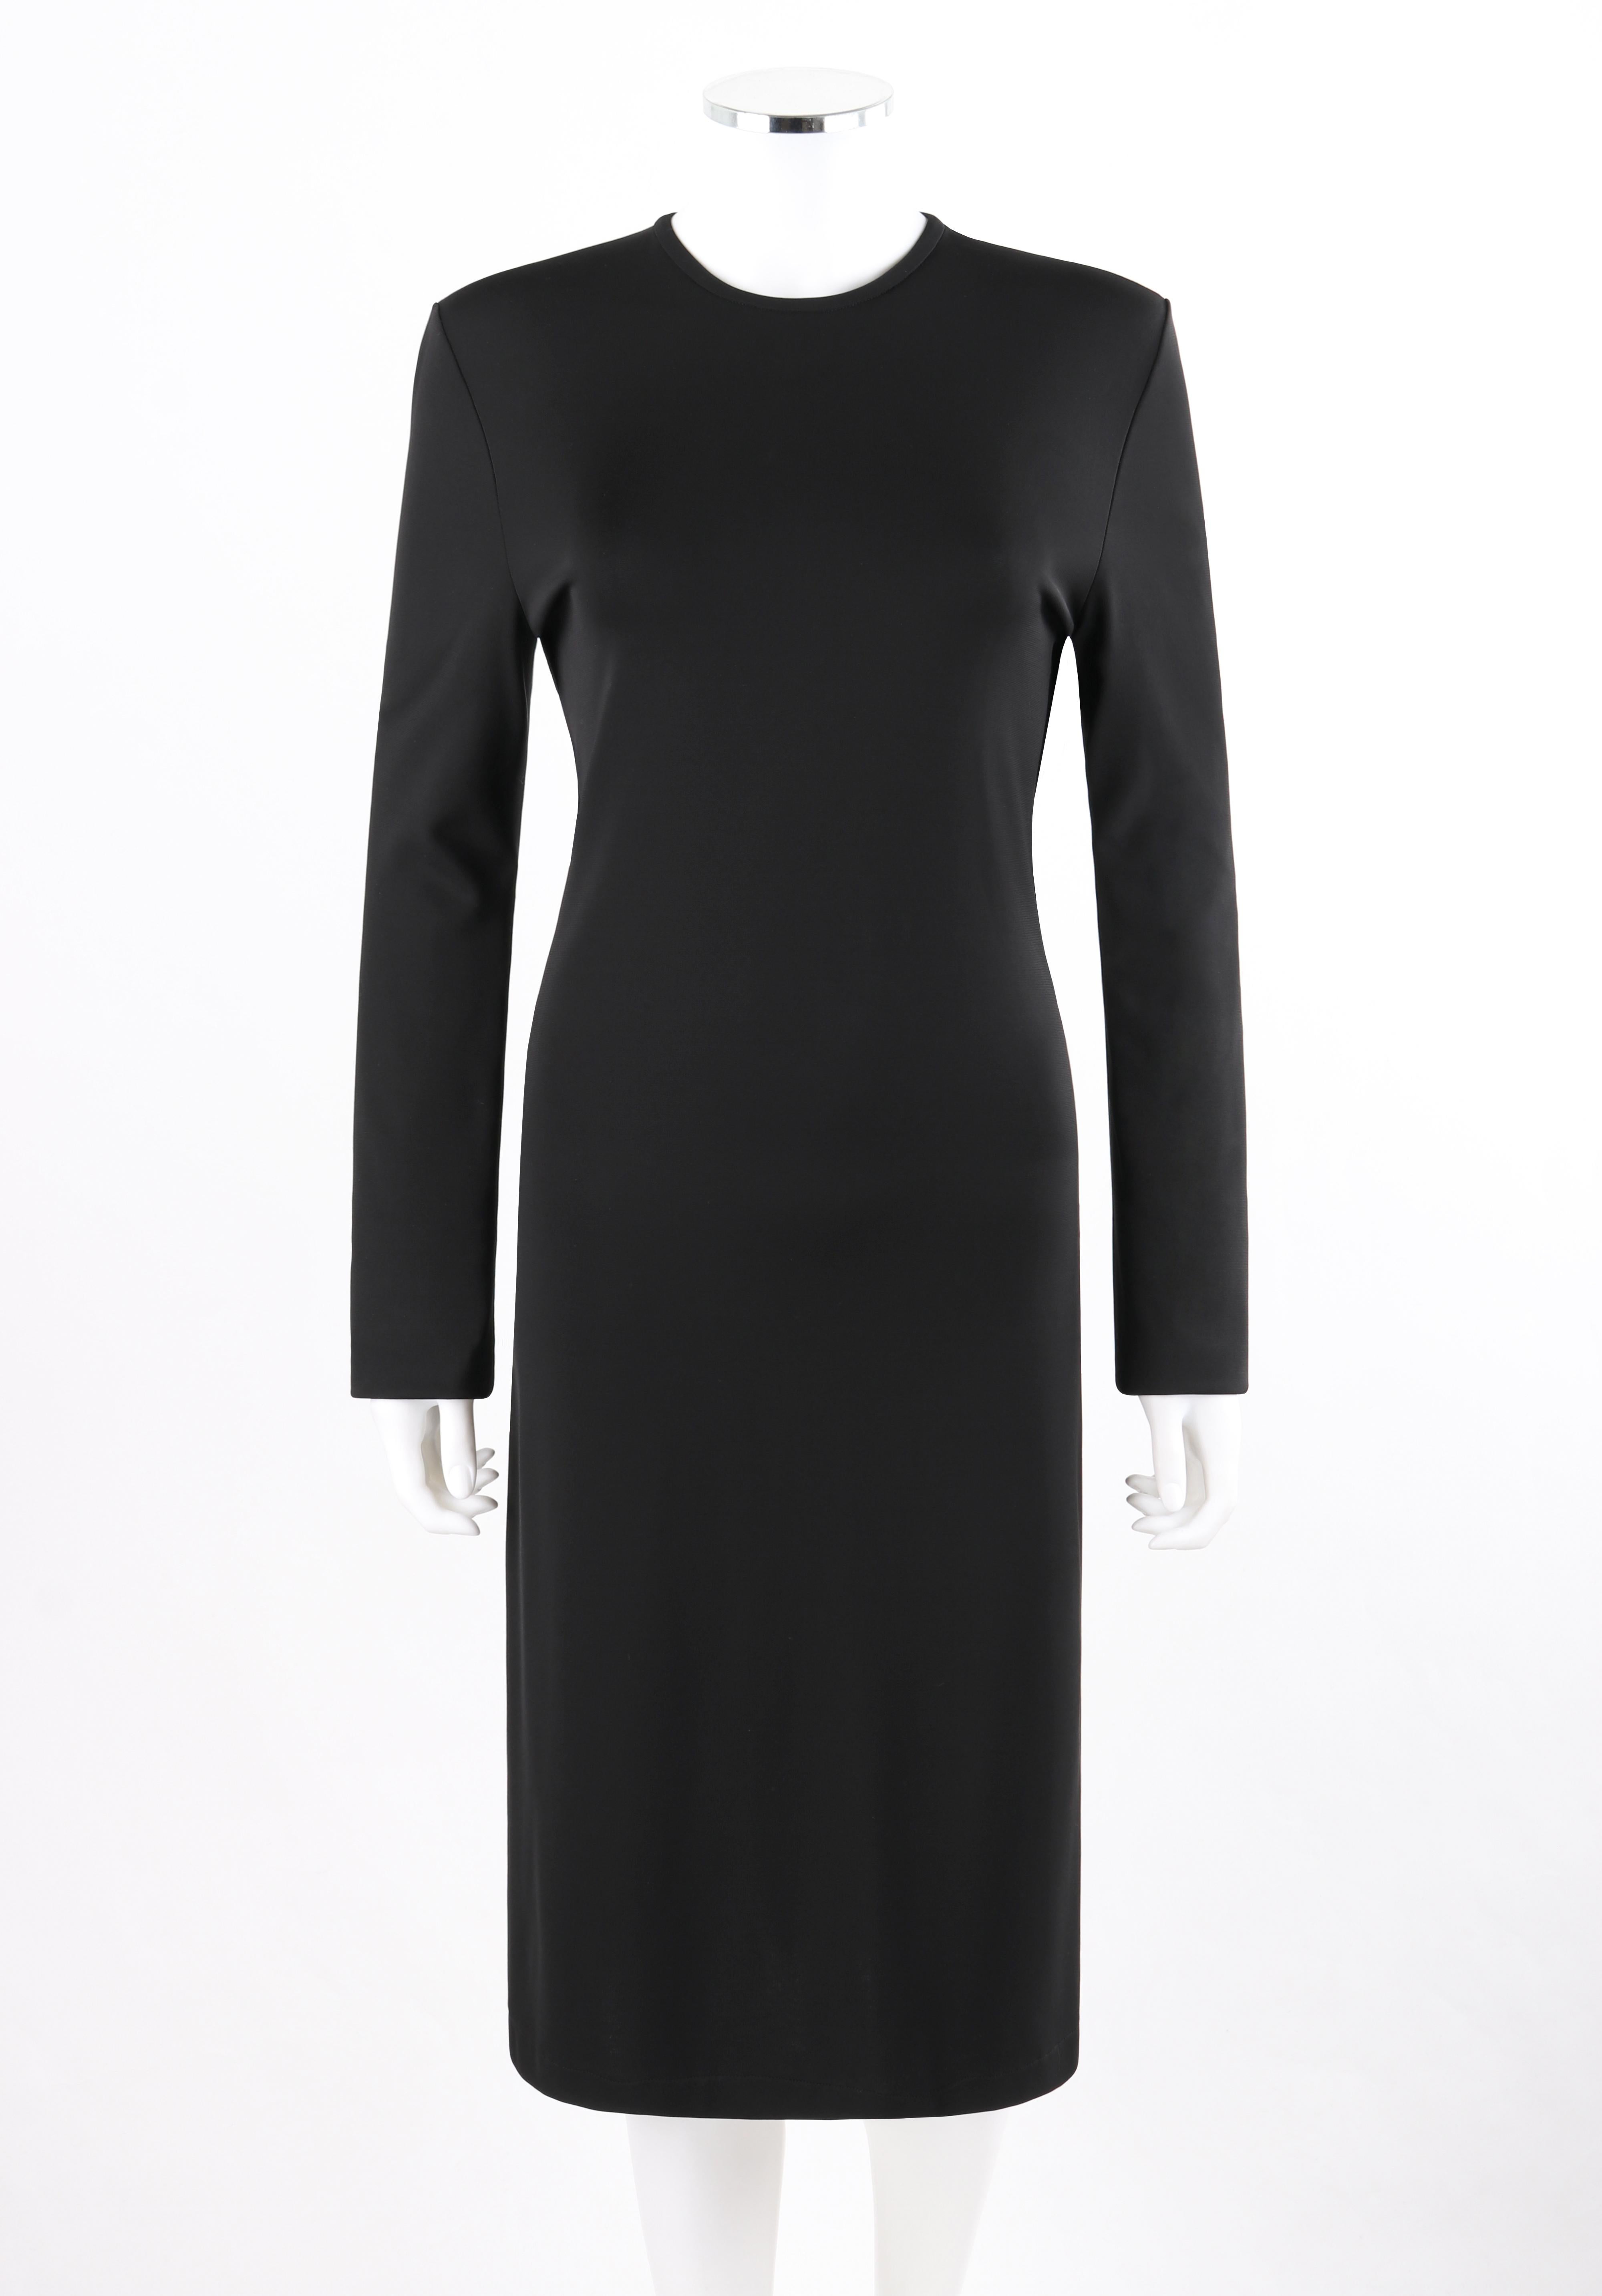 GIVENCHY Pre Fall 2013 Black Long Sleeve Ruffle Detail Knit Sheath Dress NWT

Brand / Manufacturer: Givenchy
Collection: Pre Fall 2013
Designer: Riccardo Tisci
Manufacturer Style Name: “Robe”
Style: Sheath dress
Color(s): Black
Lined: No
Marked